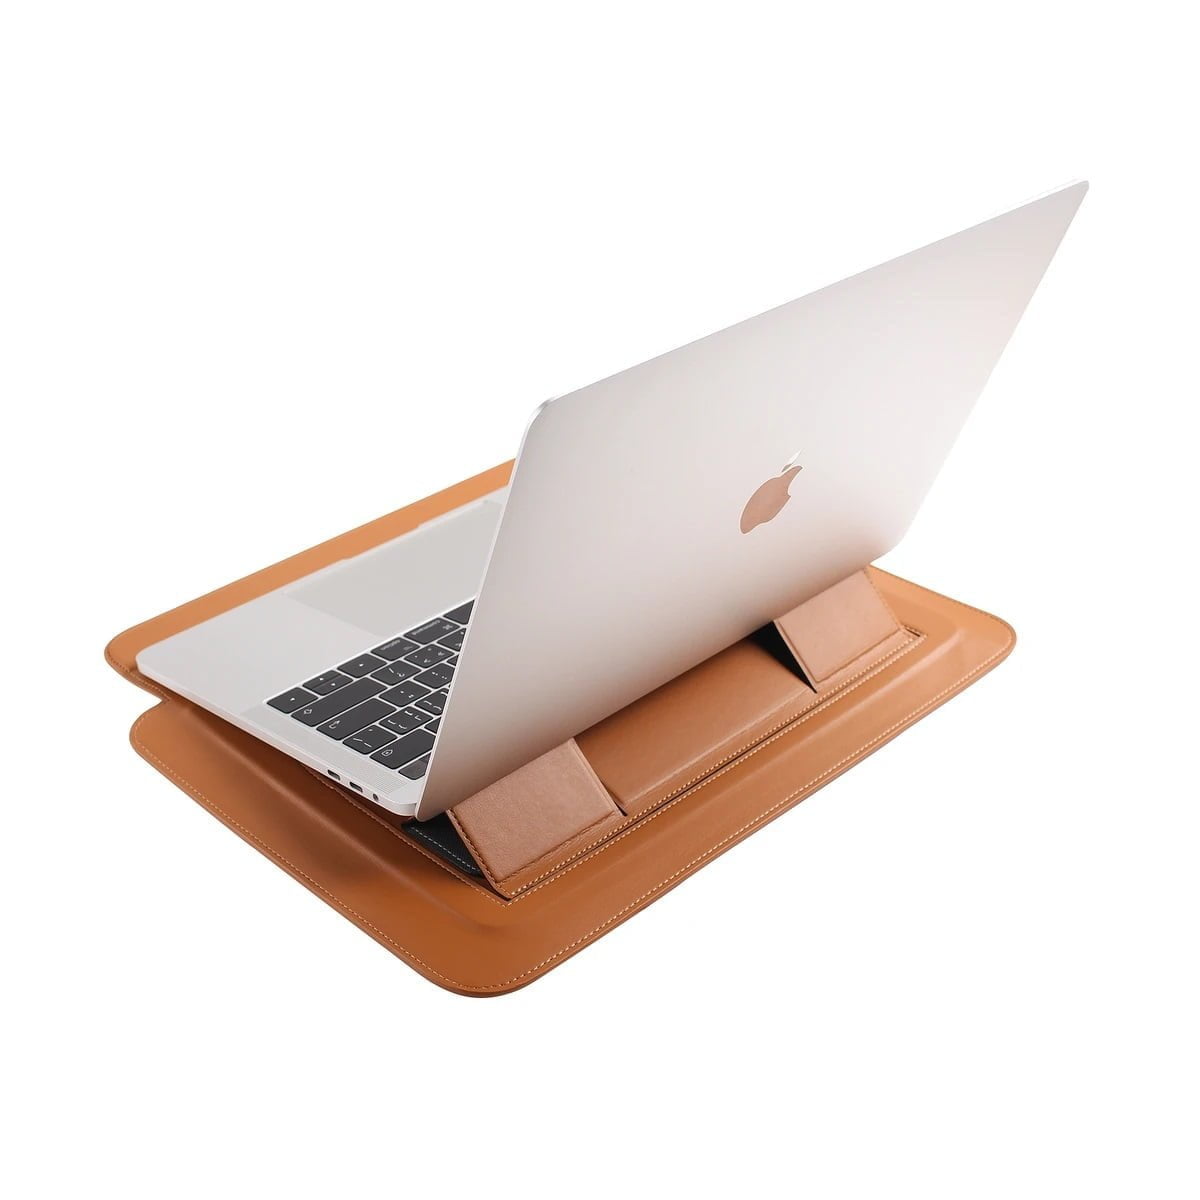 Jcp2392 Multifunction Sleeve Stand Saddlebrown &Lt;H1&Gt;Ergo Multifunction Sleeve Stand (Gray)&Lt;/H1&Gt; The Elegantly Compact Multifunction Sleeve Stand Is A Practical Carry Accessory That Allows You To Use Your Laptop In A More Ergonomic Position When You’re On The Go And Minimize Neck Strain. Featuring A Built-In Stand That Props Up Your Laptop To A 15° Or 30° Position, Magnetic Closures And Made From A Durable Pu Material, The Multifunction Sleeve Stand Is Versatile Travel Accessory. &Lt;Ul&Gt; &Lt;Li&Gt;Ergonomic Riser Stand Holds Laptop At 15° Or 30°&Lt;/Li&Gt; &Lt;Li&Gt;Magnetic Closure/Stand For Quick And Easy Setup&Lt;/Li&Gt; &Lt;Li&Gt;Increases Cooling Airflow Around Laptop&Lt;/Li&Gt; &Lt;Li&Gt;Durable 3Mm Pu Material&Lt;/Li&Gt; &Lt;/Ul&Gt; Ergo Multifunction Sleeve Stand (Gray) - Jcp2393 Ergo Multifunction Sleeve Stand (Gray) - Jcp2393